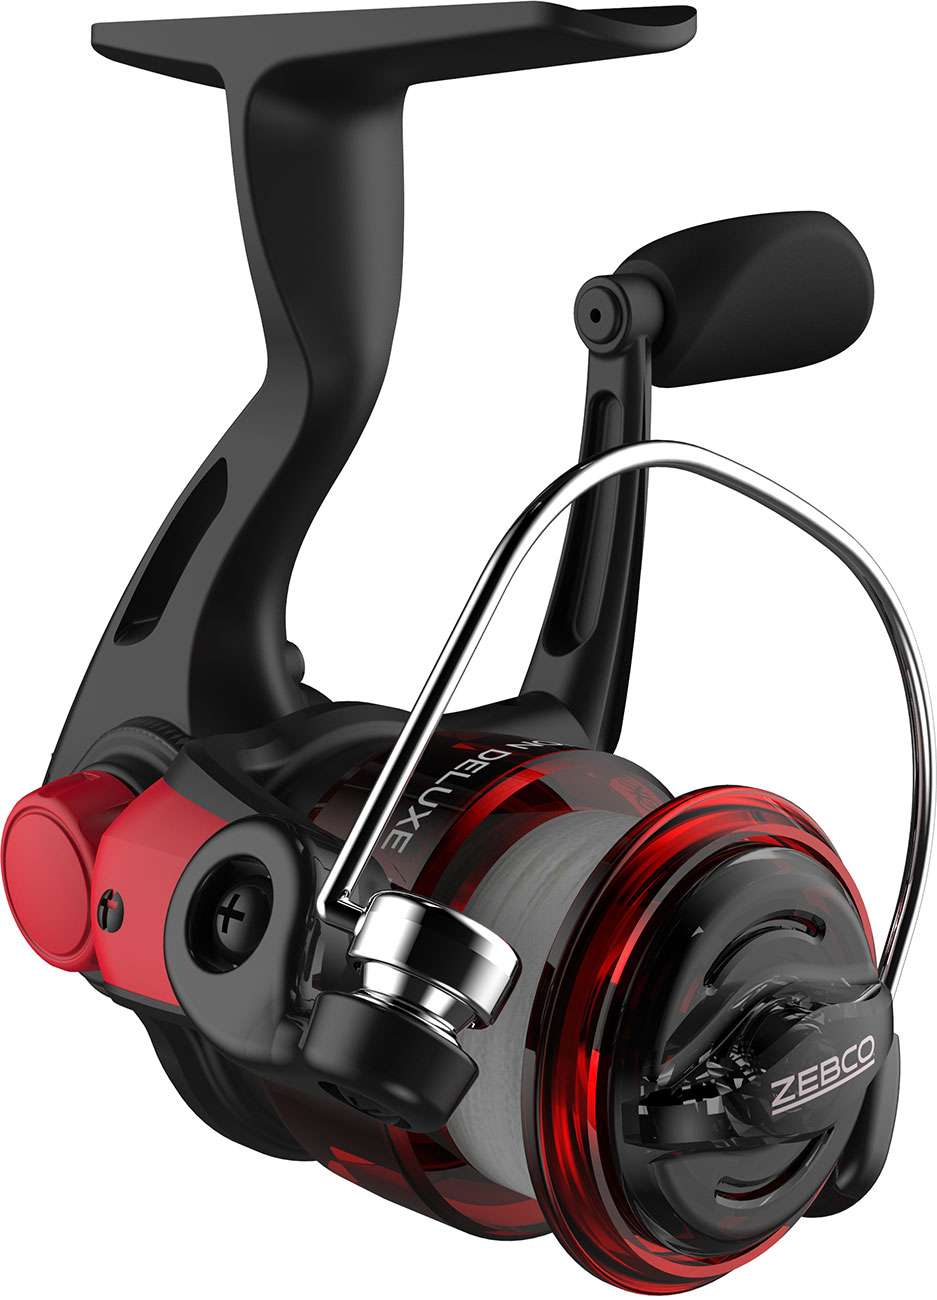 Zebco Dock Demon Spinning Reel or Spincast Reel and Fishing Rod